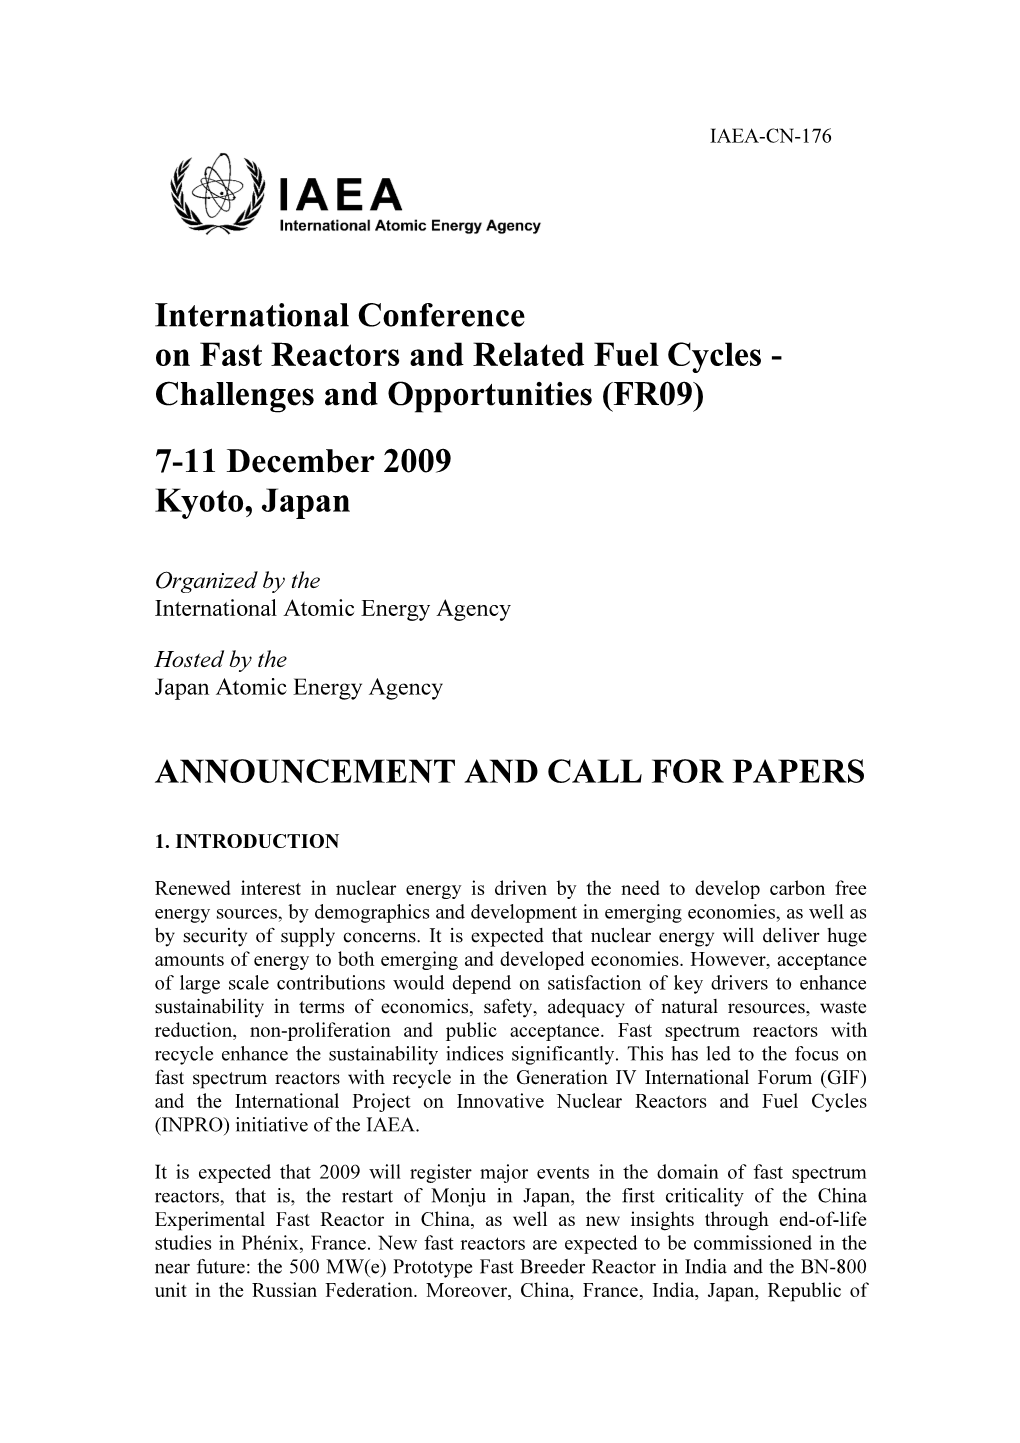 090220 Announcement Call for Papers FINAL After Clear